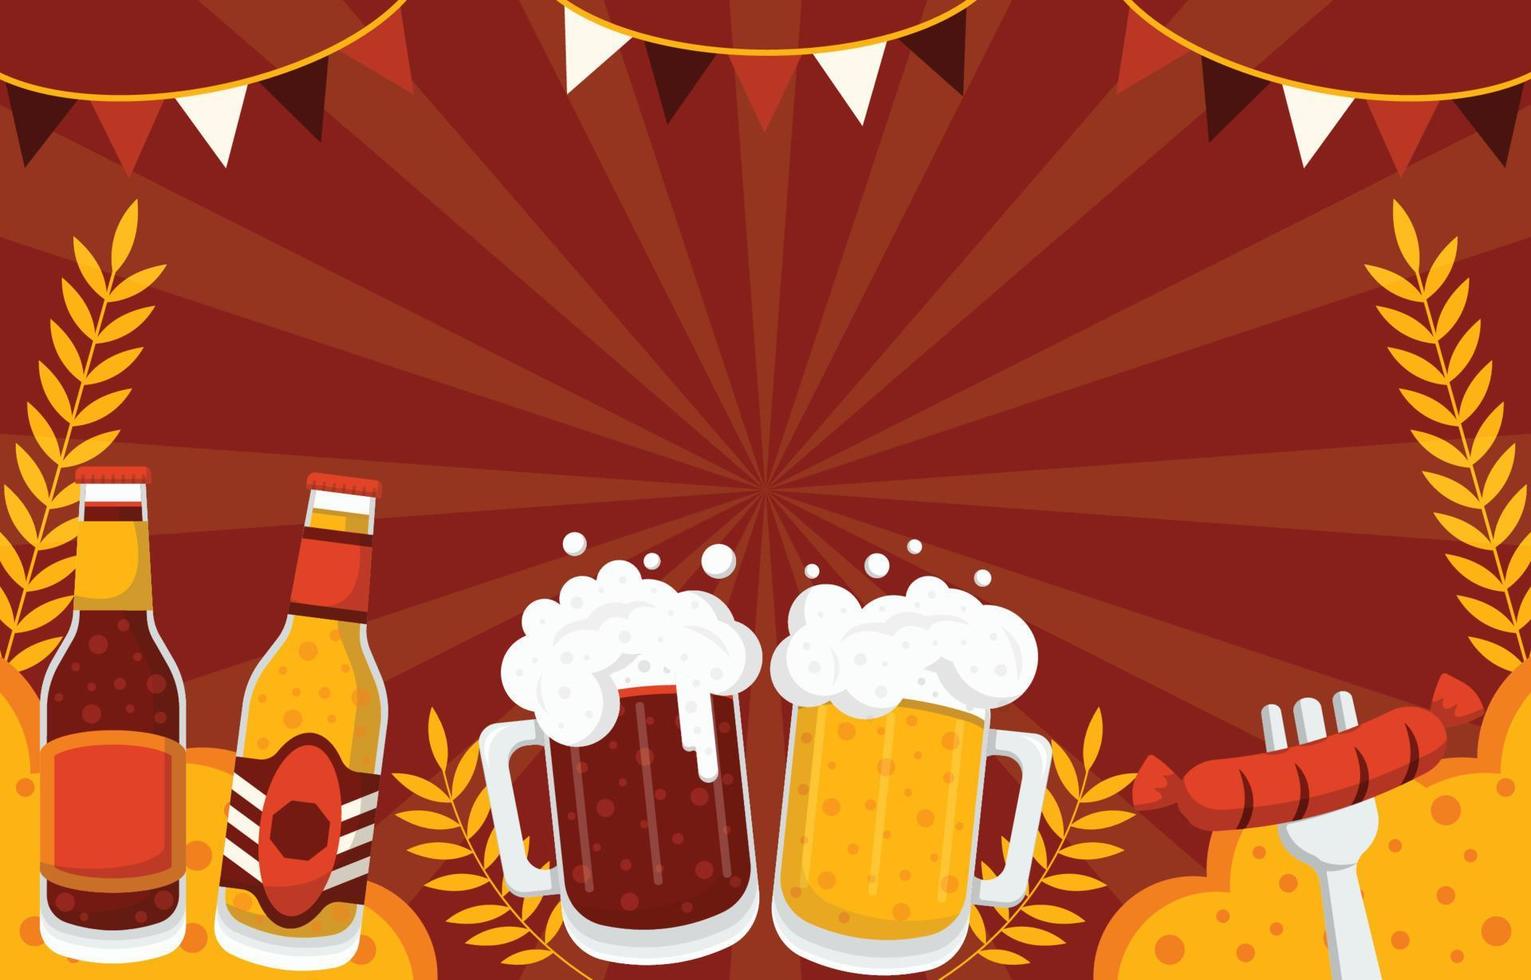 Bottles Foamy Beer Glass and Sausage For Oktoberfest vector